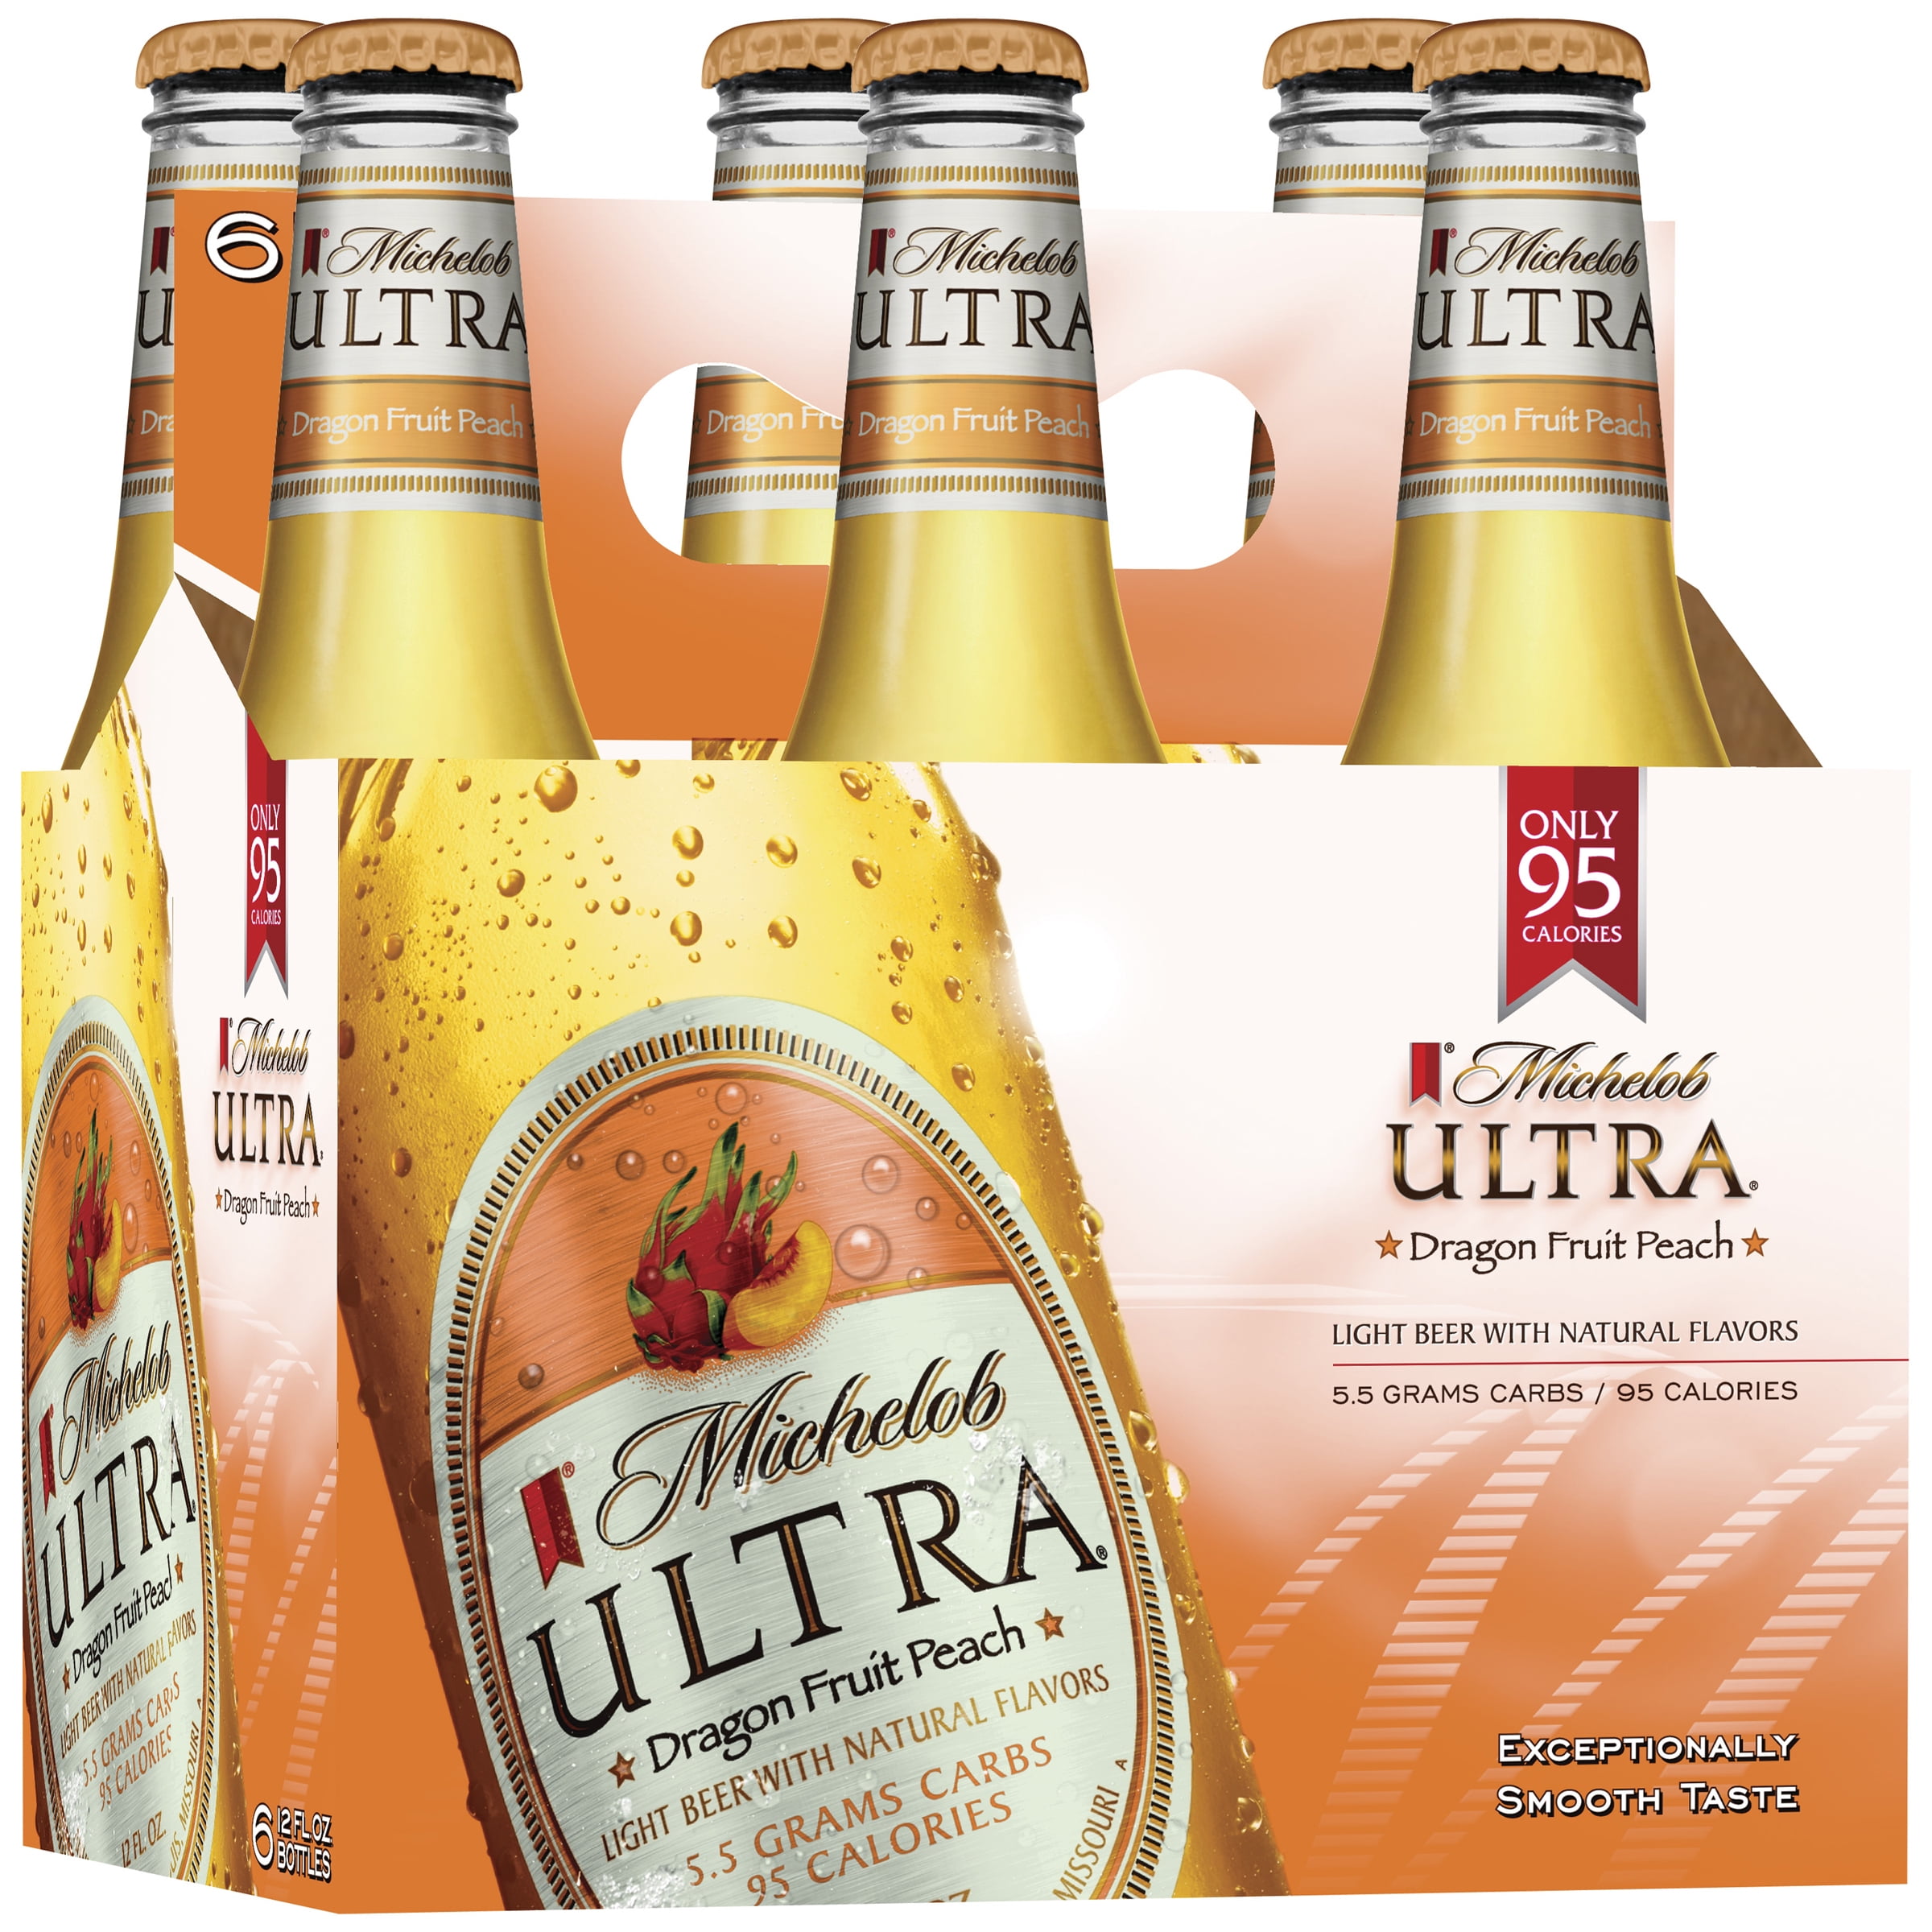 What are some nutritional facts about Michelob Ultra?